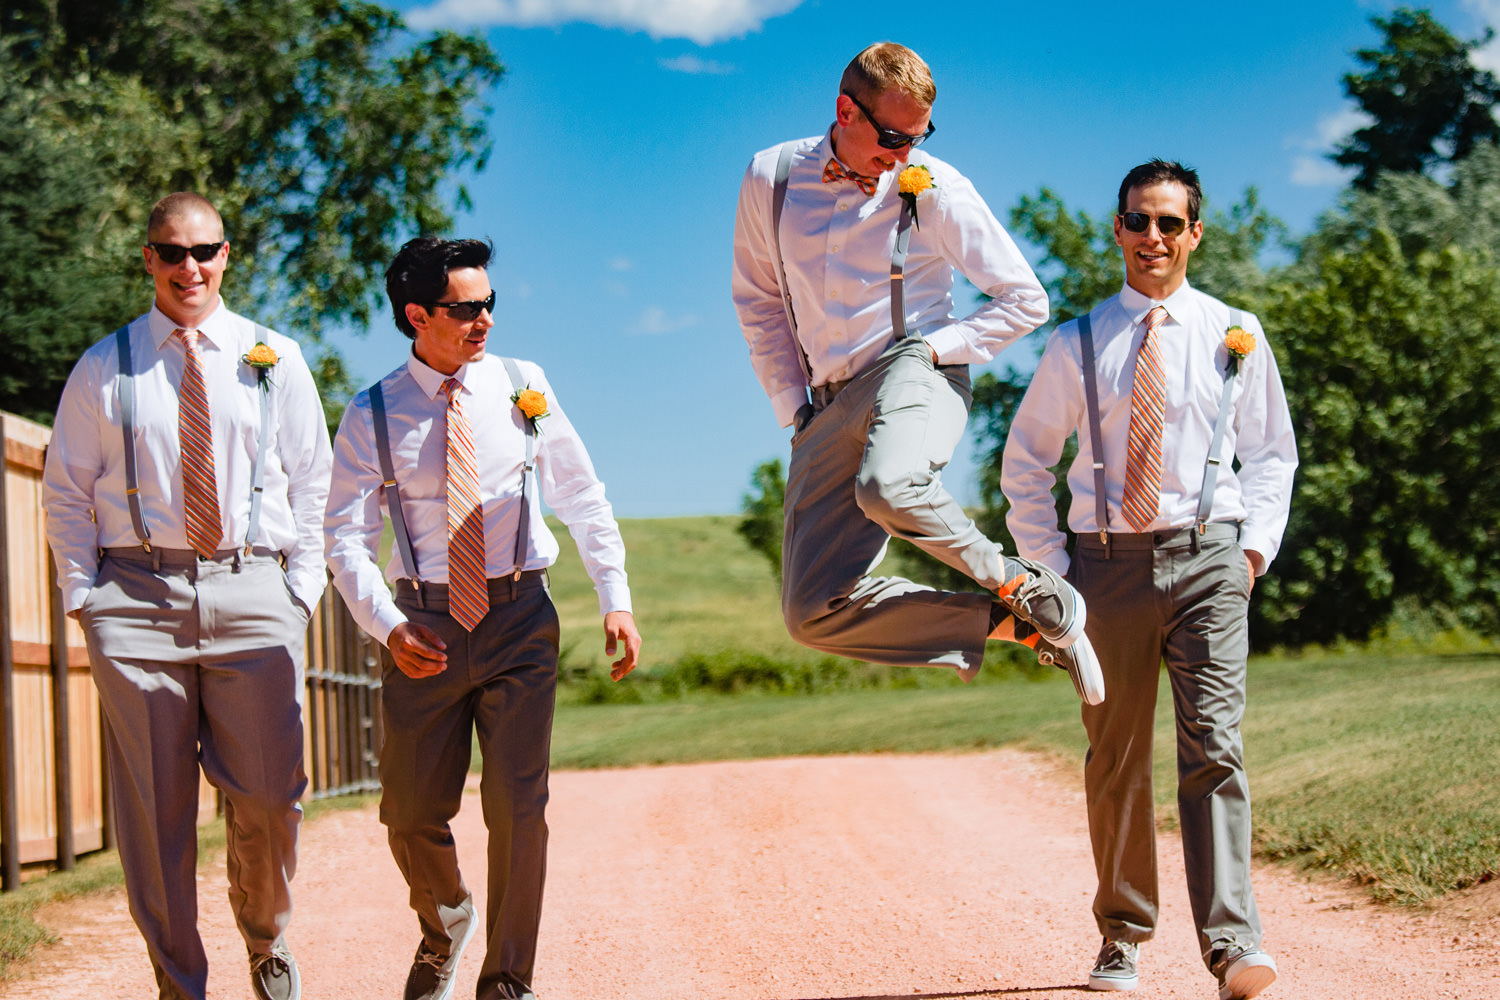 Groom jumps for joy with groomsmen during a preserve and bingham hill wedding near fort Collins, Colorado